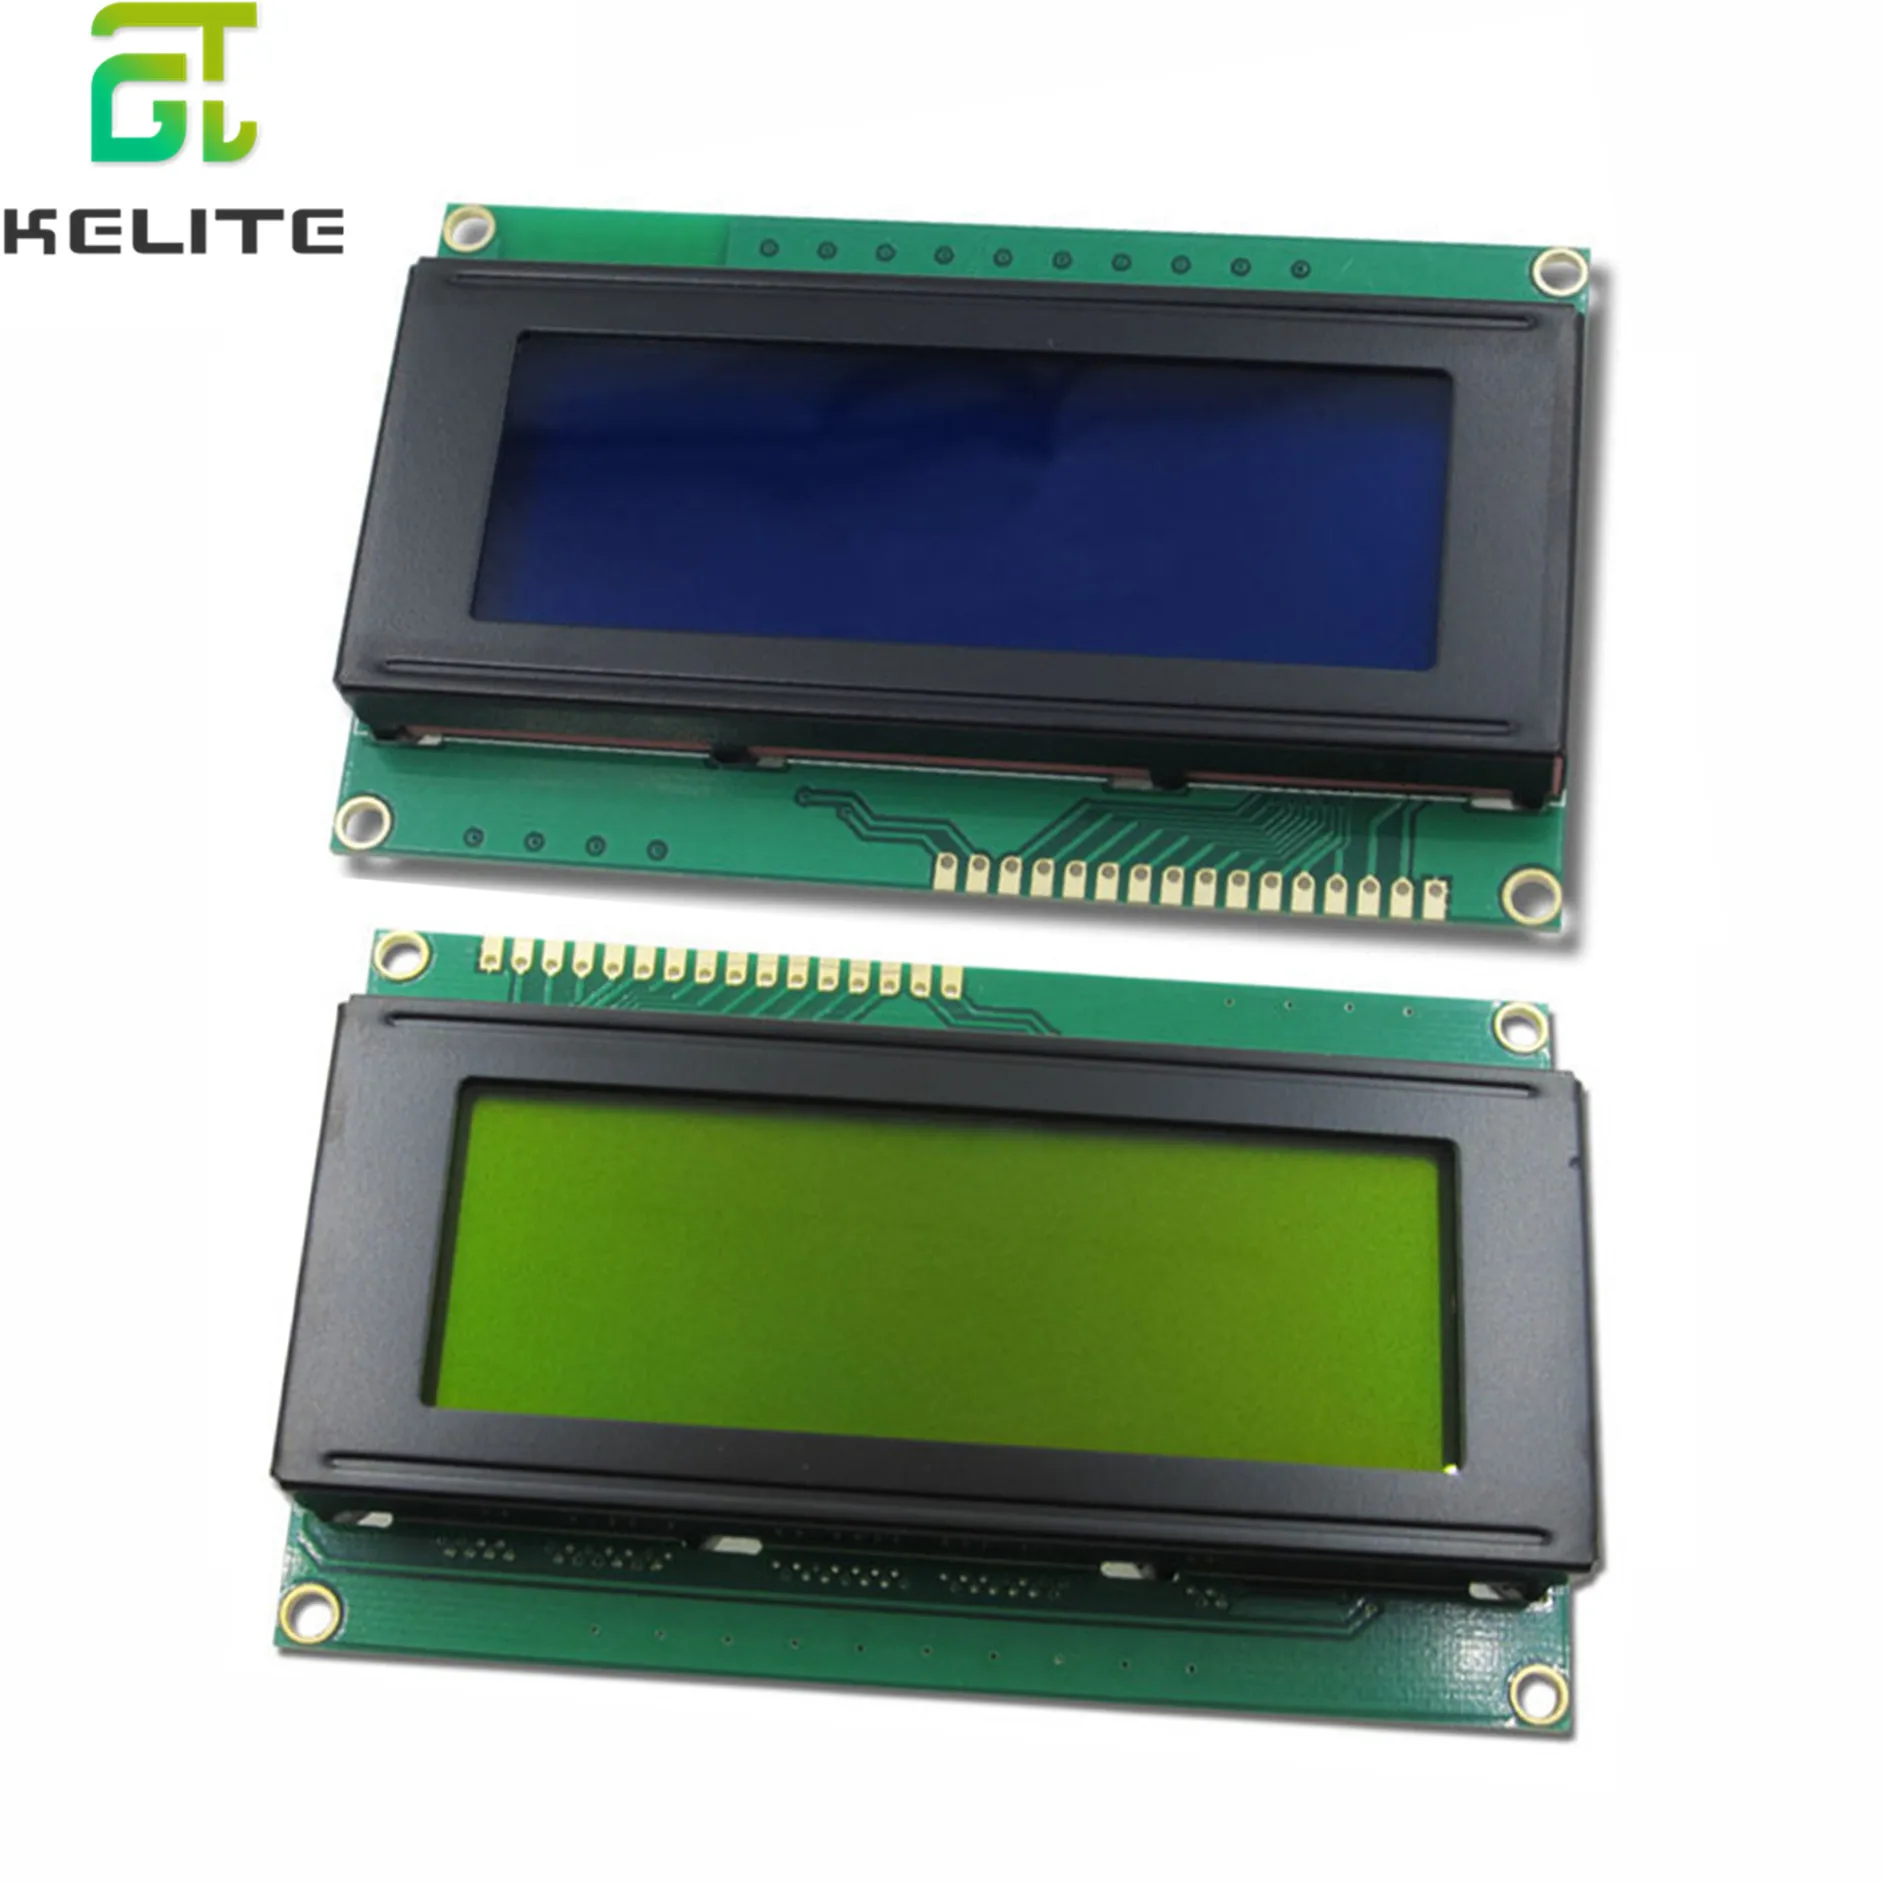 20pcs 20x4 LCD Modules 2004 LCD Module with LED Blue/Green Backlight White Character/Yellow Green